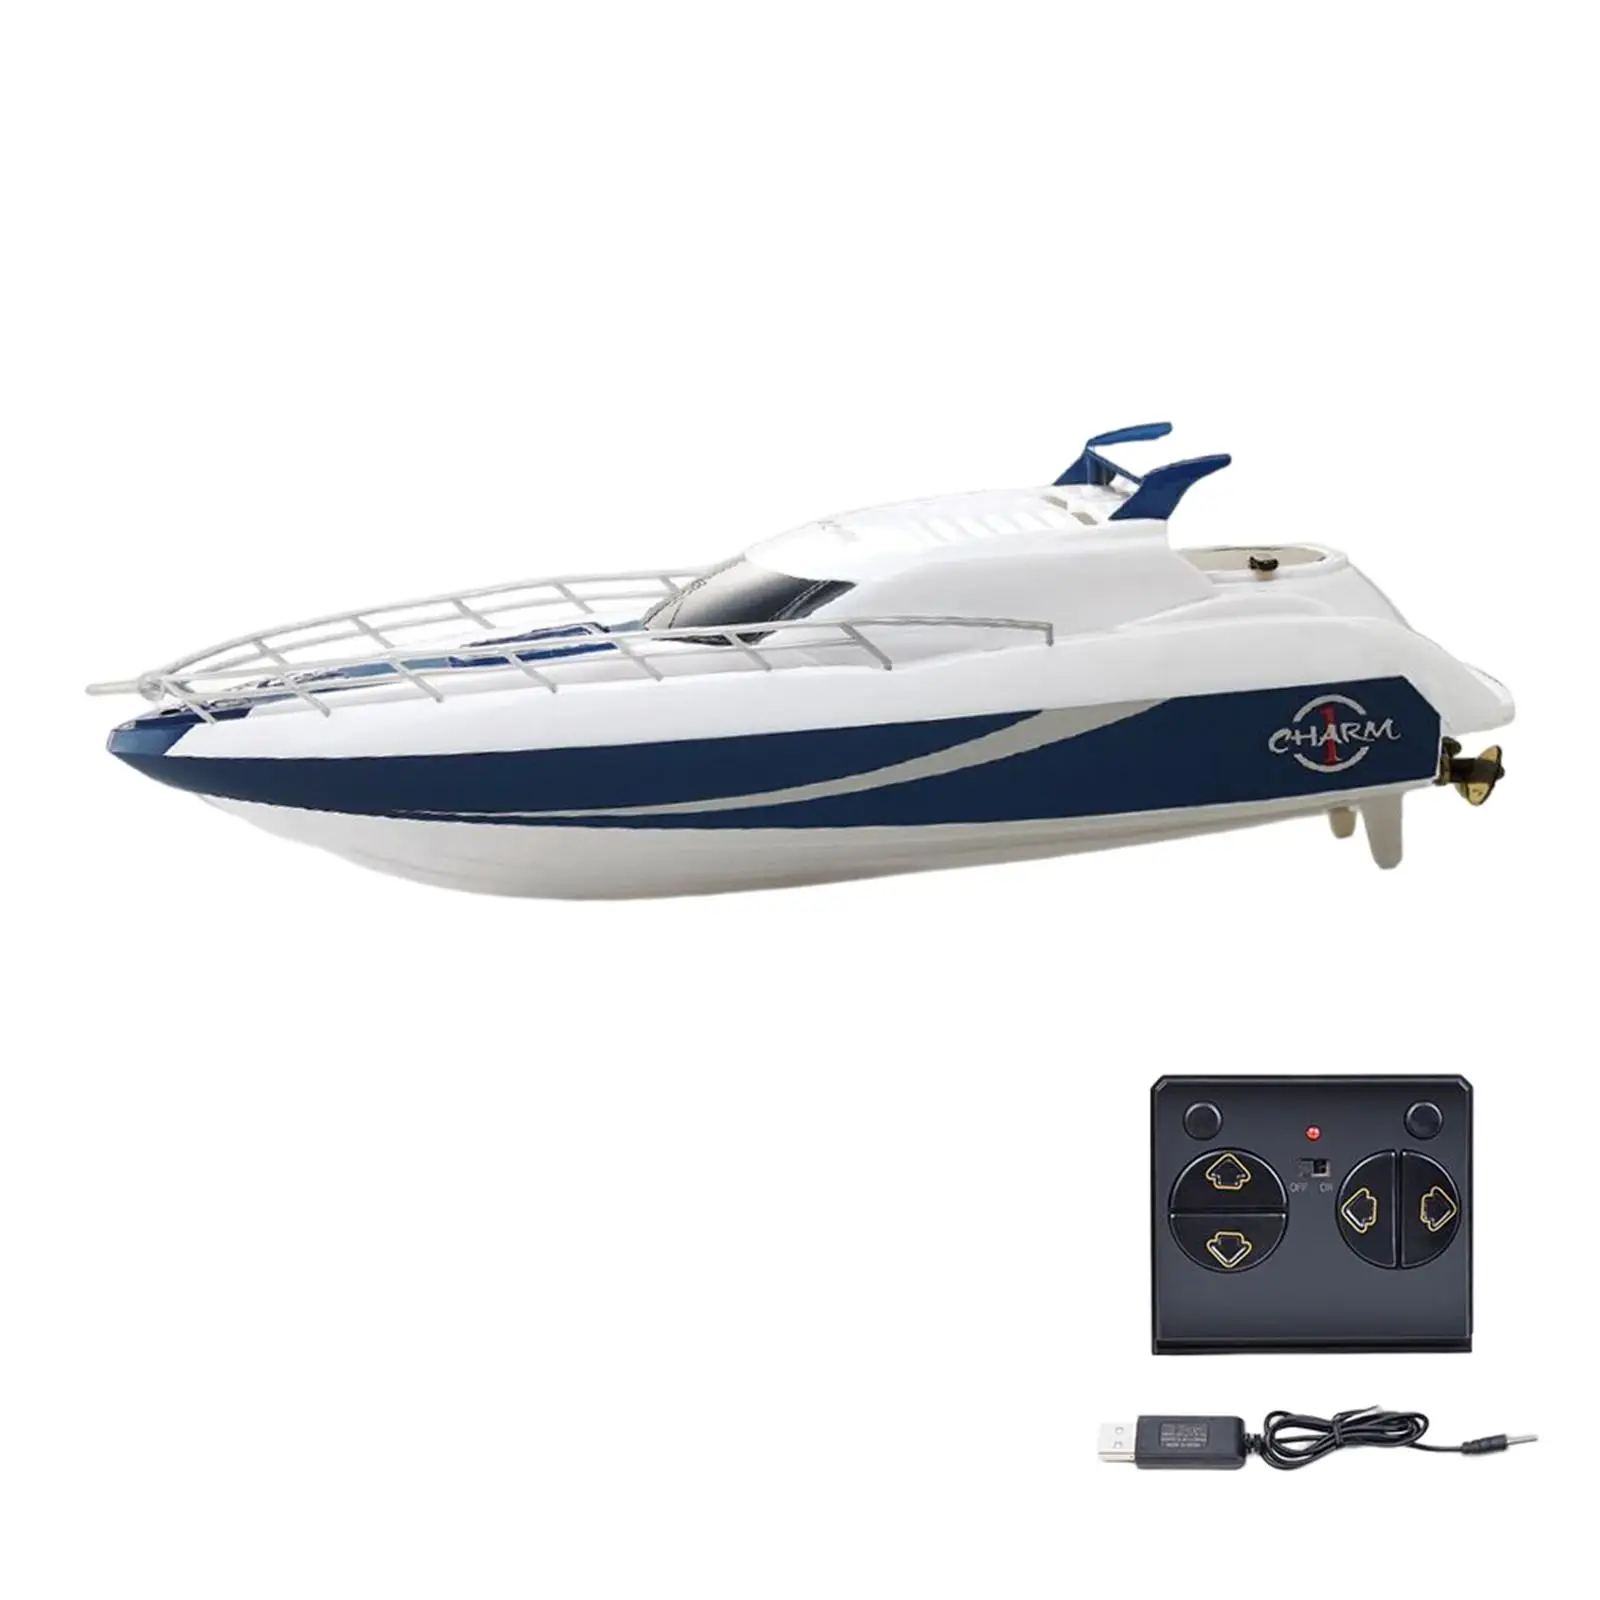 Remote Control Boat Toy Water Toy Boat RC Boat Warship Model USB Rechargeable for Adults Beginner Boys Kids Birthday Gifts